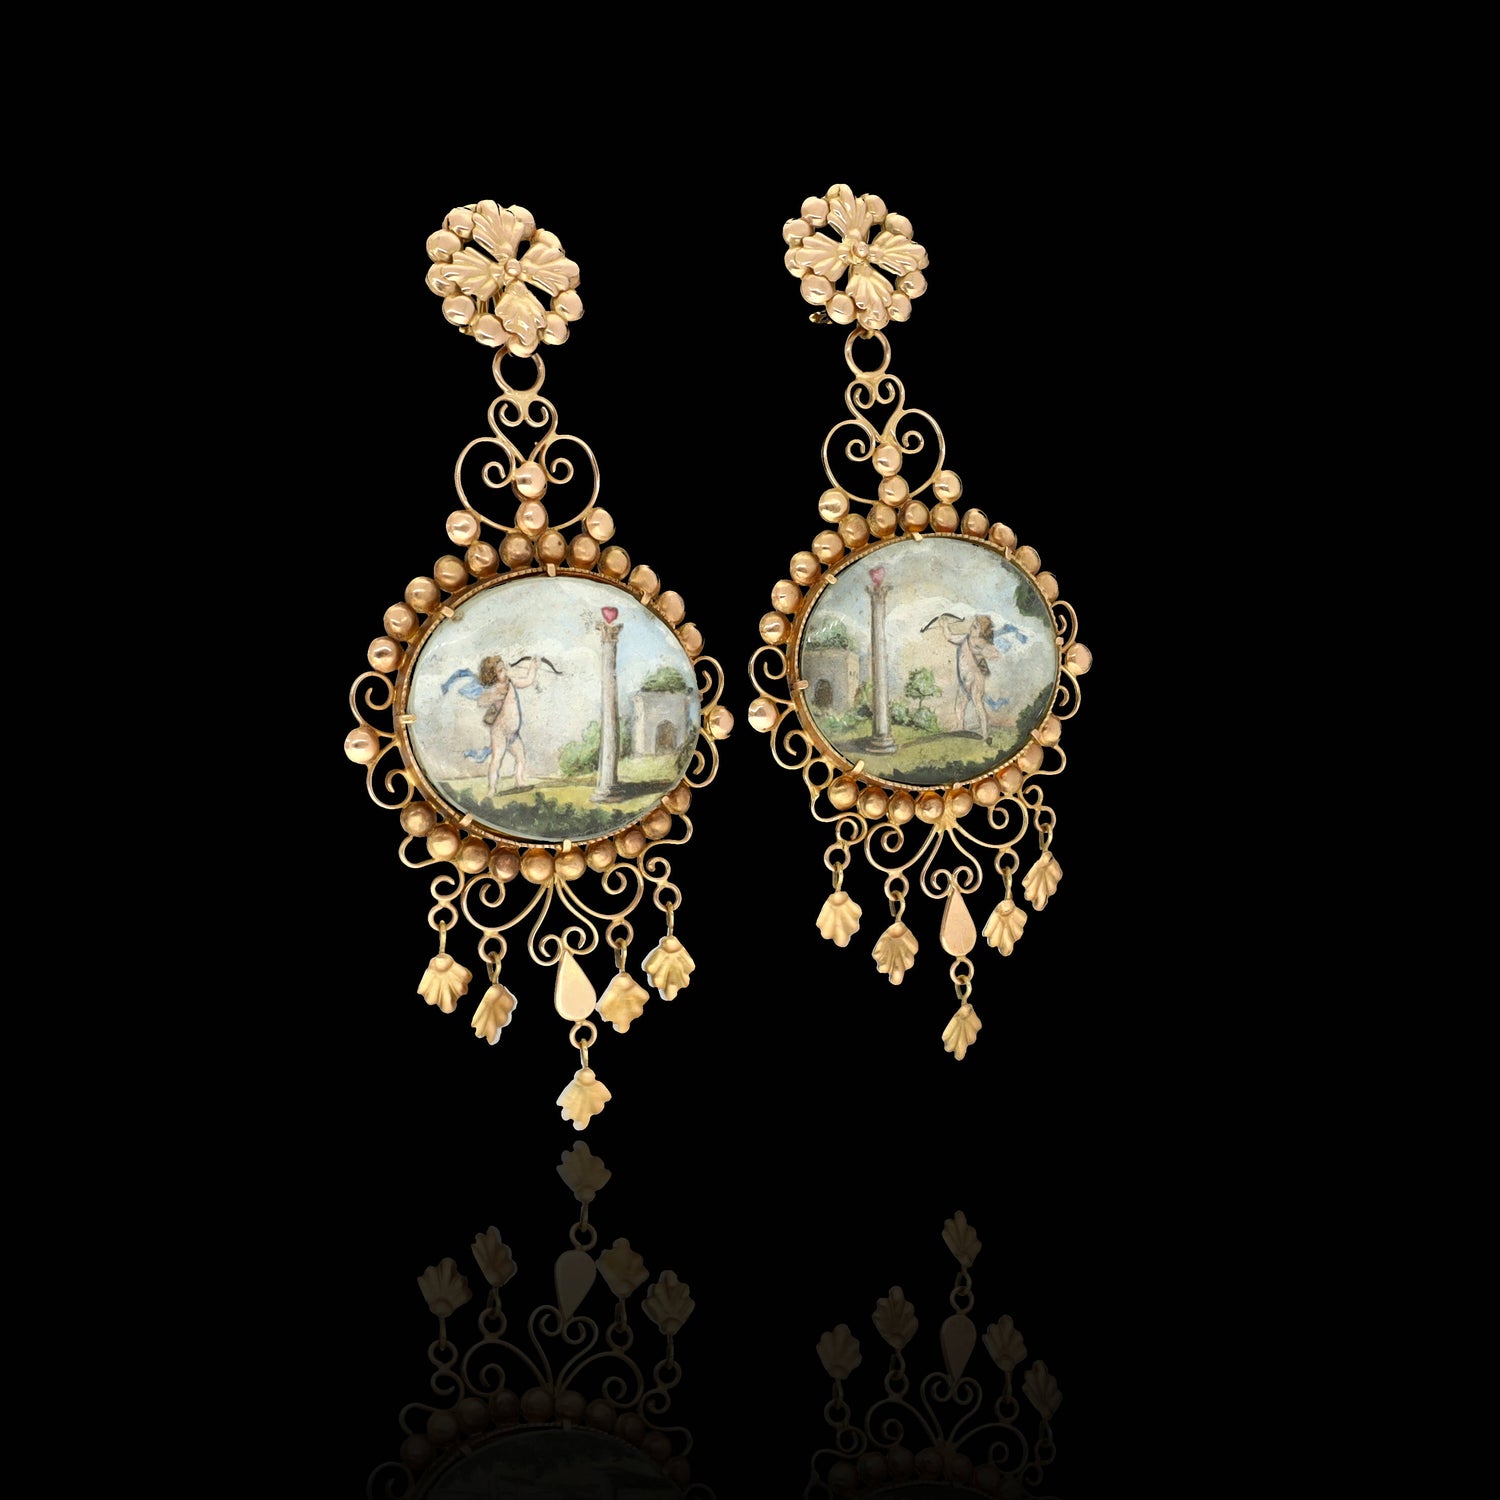 An absolutely UNIQUE and MUSEUM-WORTHY Early Victorian era cupid miniature earrings made of solid 14k yellow gold!  Coming from Italy, this almost 250 year old earrings boast an amazing decorative profile.